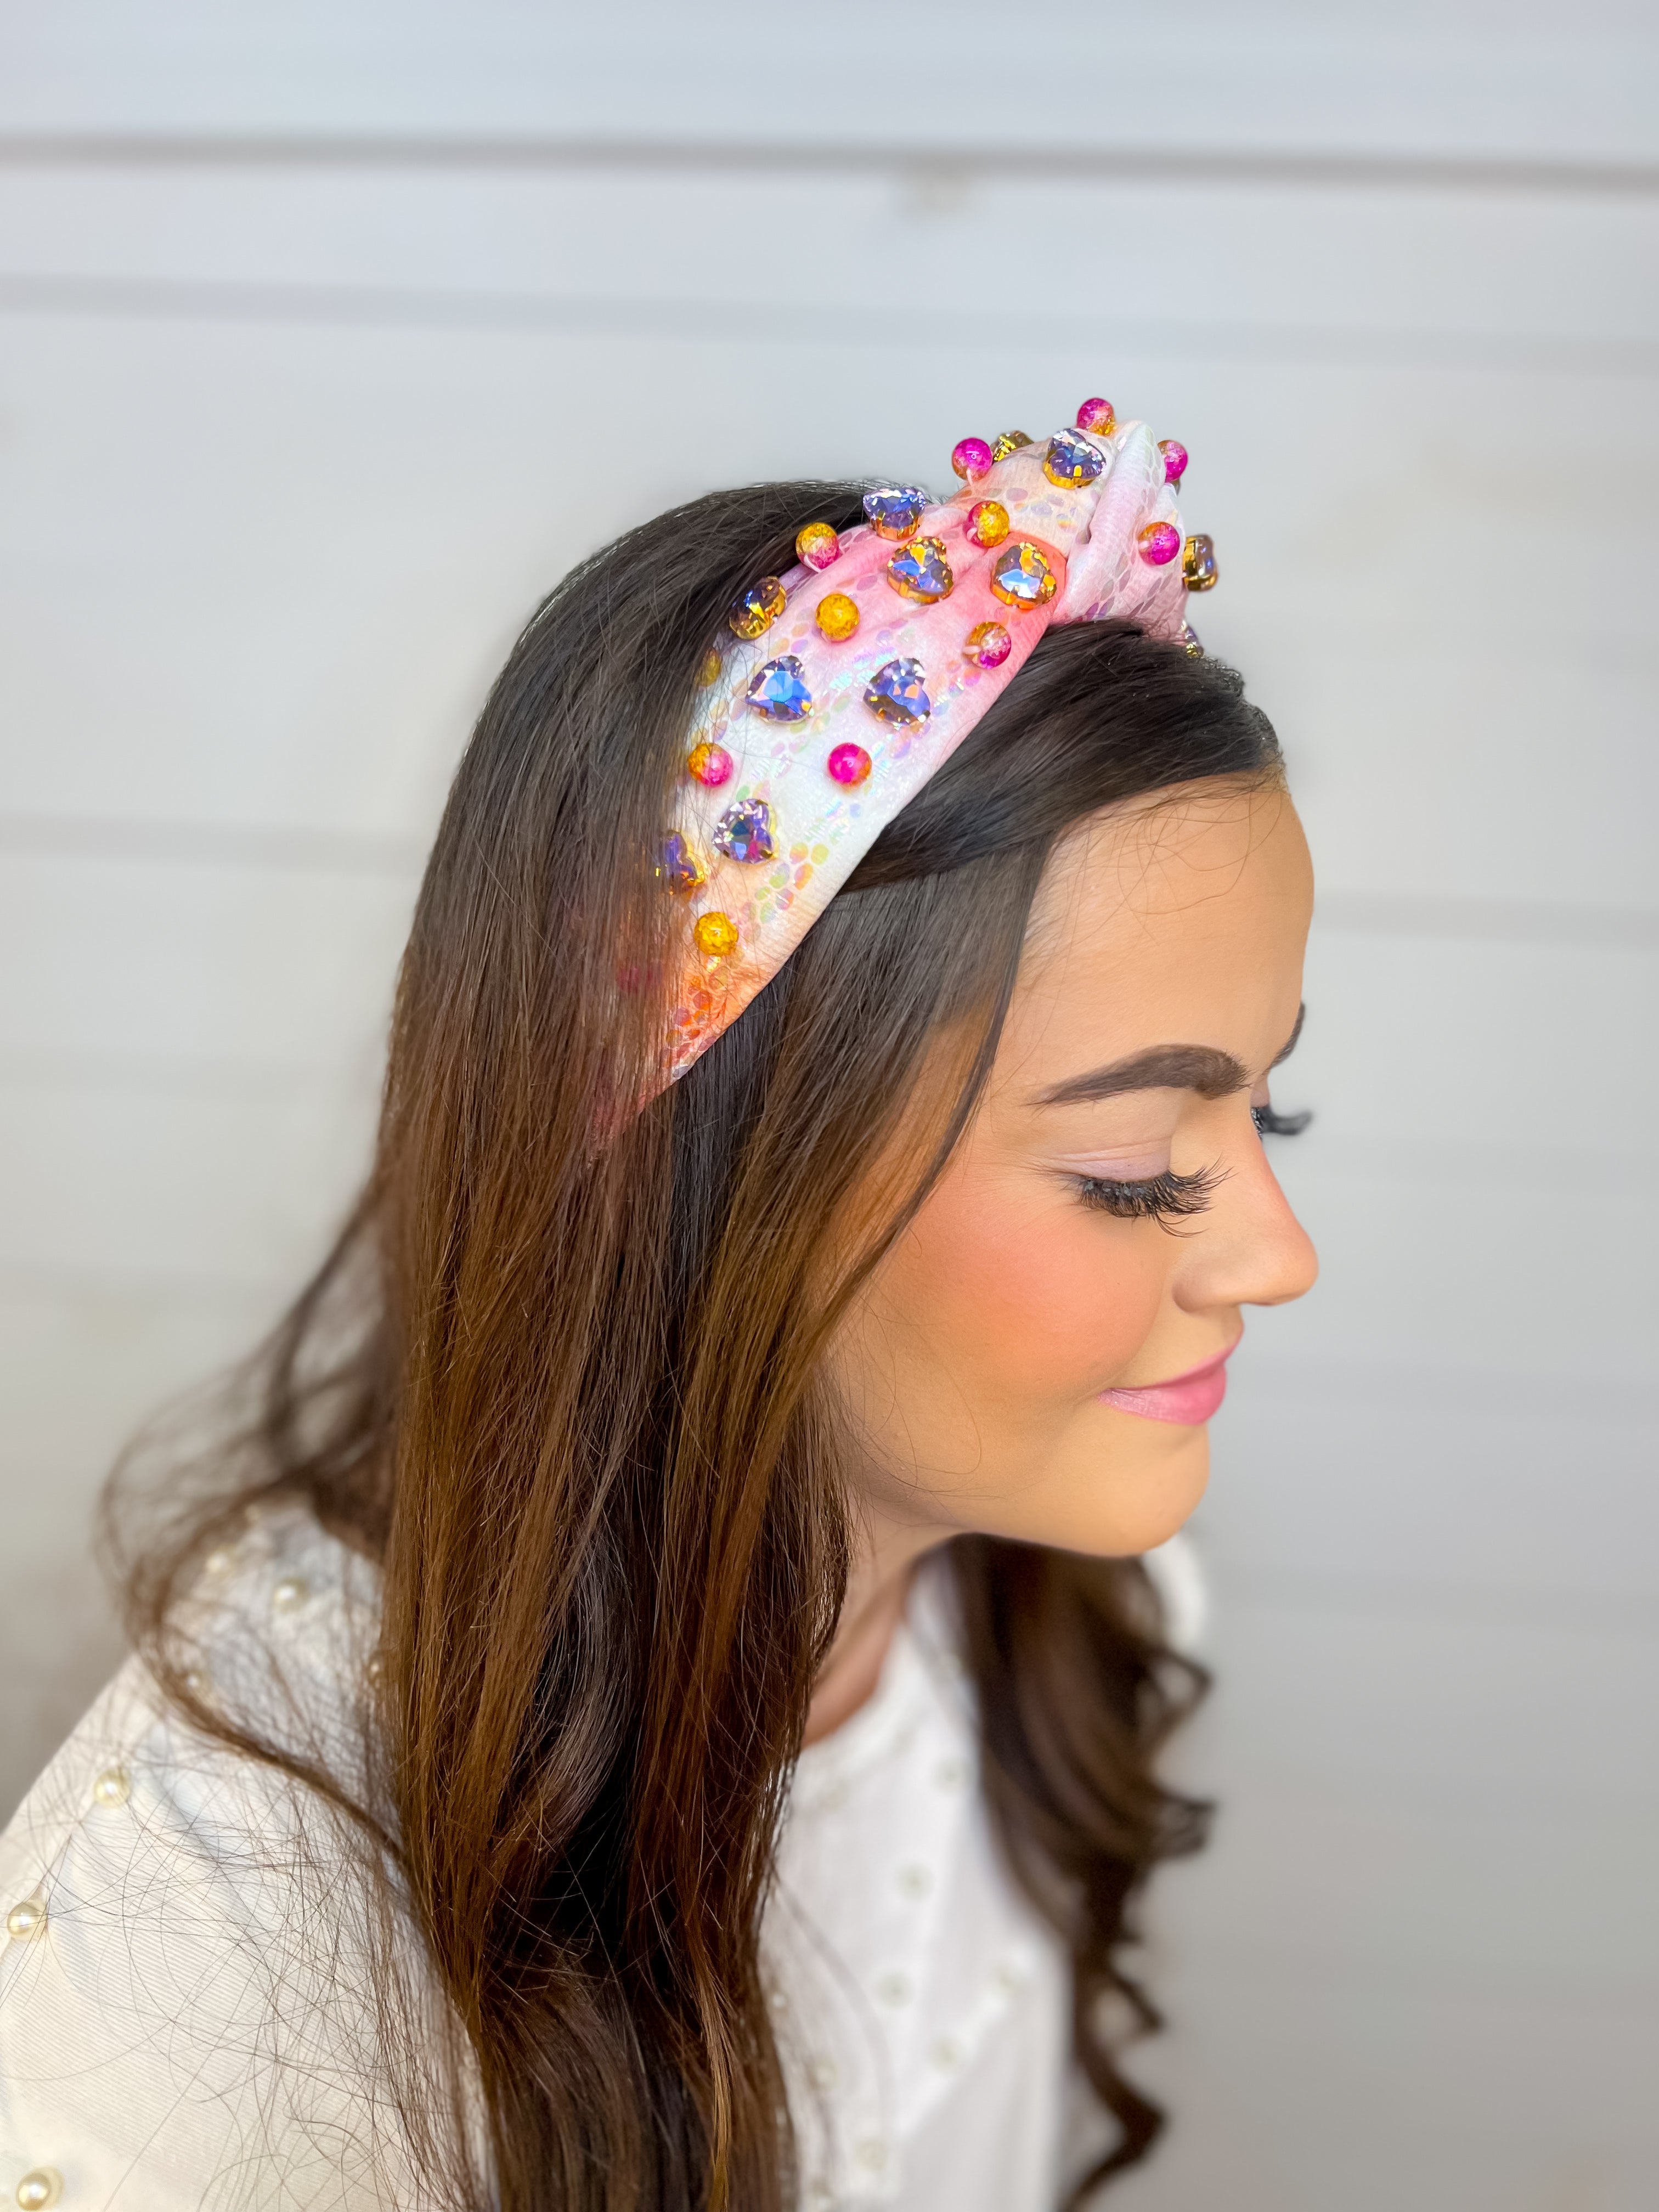 [Brianna Cannon] Pink Ombre Headband With Hearts/Beads